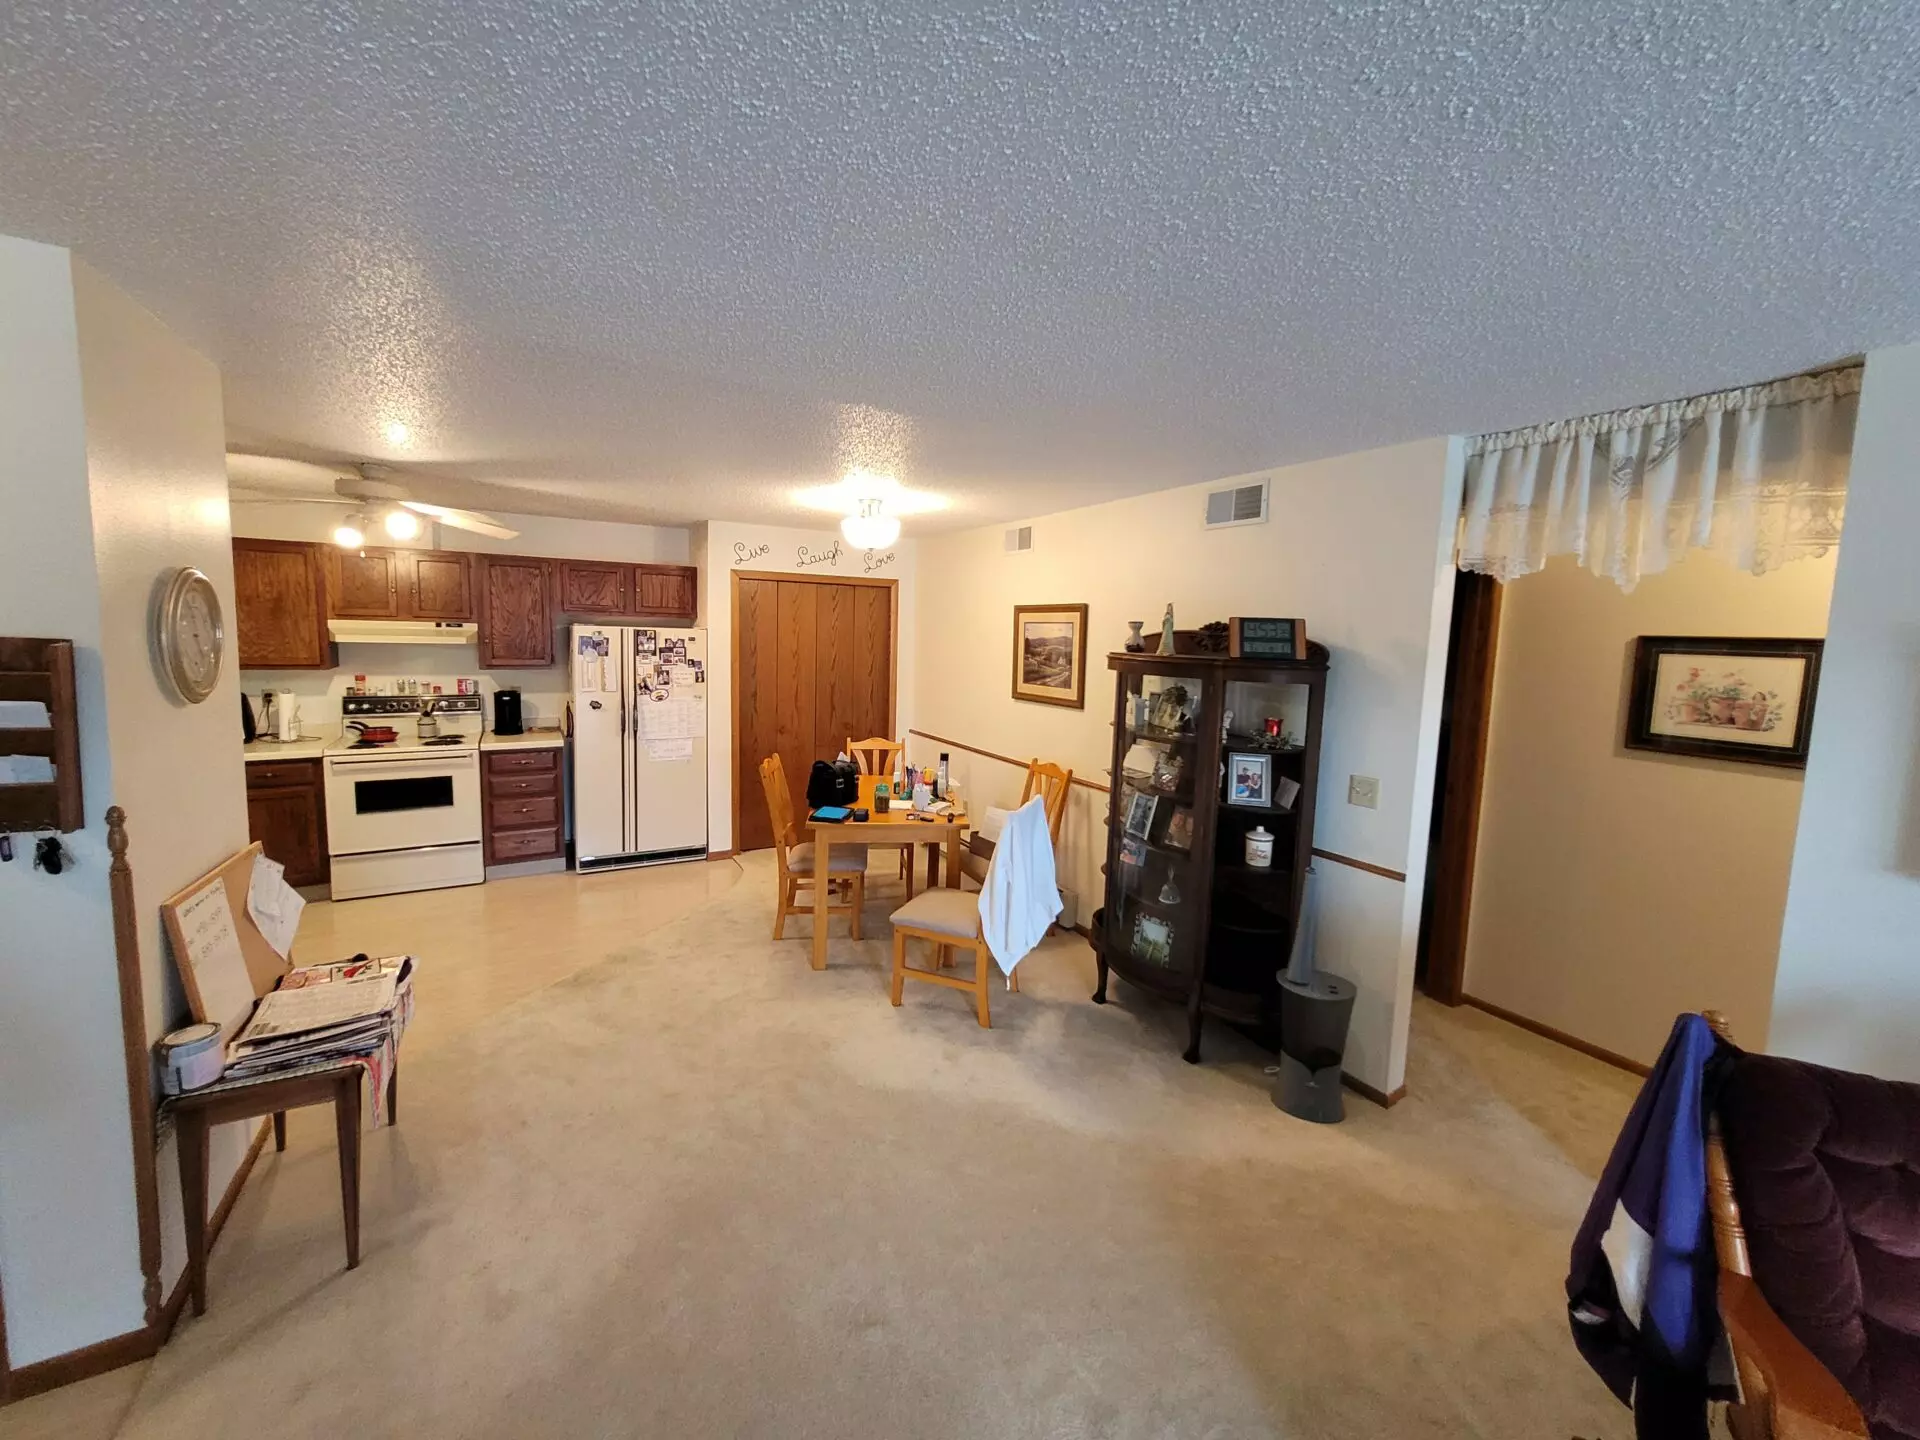 Sheet viny in kitchen and carpet in a dining area in Valley City, ND.